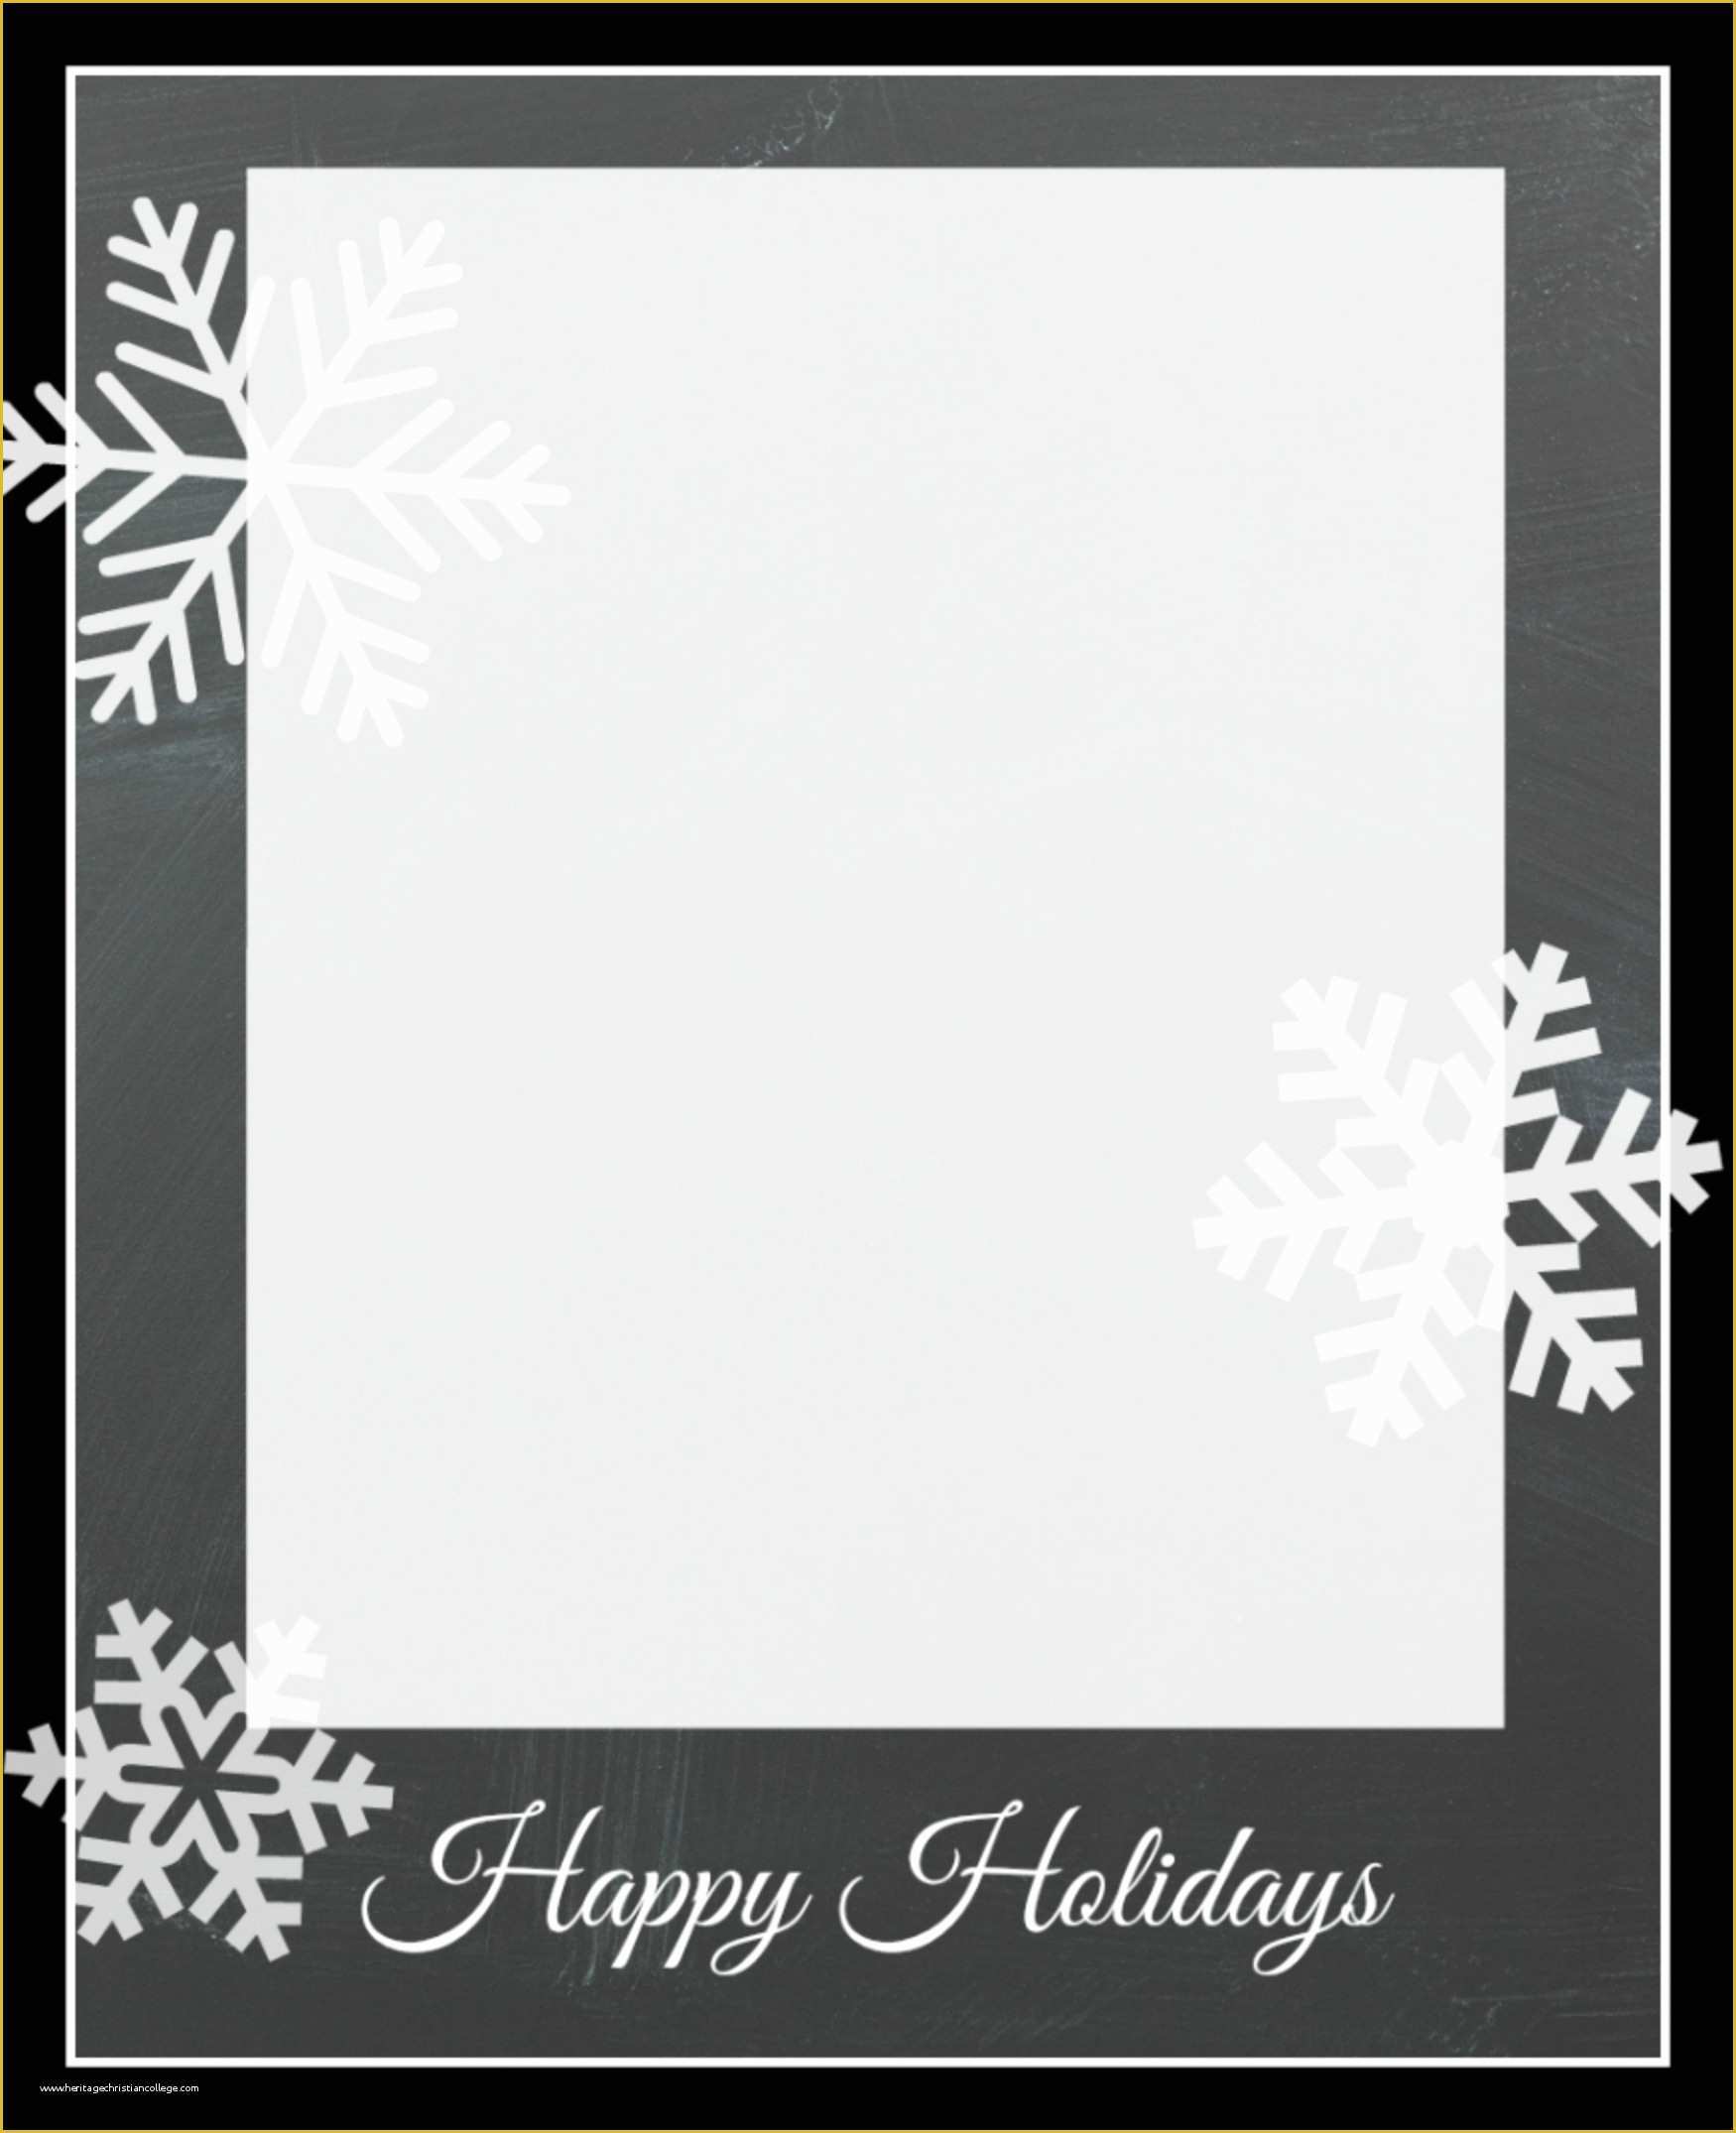 Free Christmas Greeting Card Templates Of Free Christmas Card Templates Crazy Little Projects